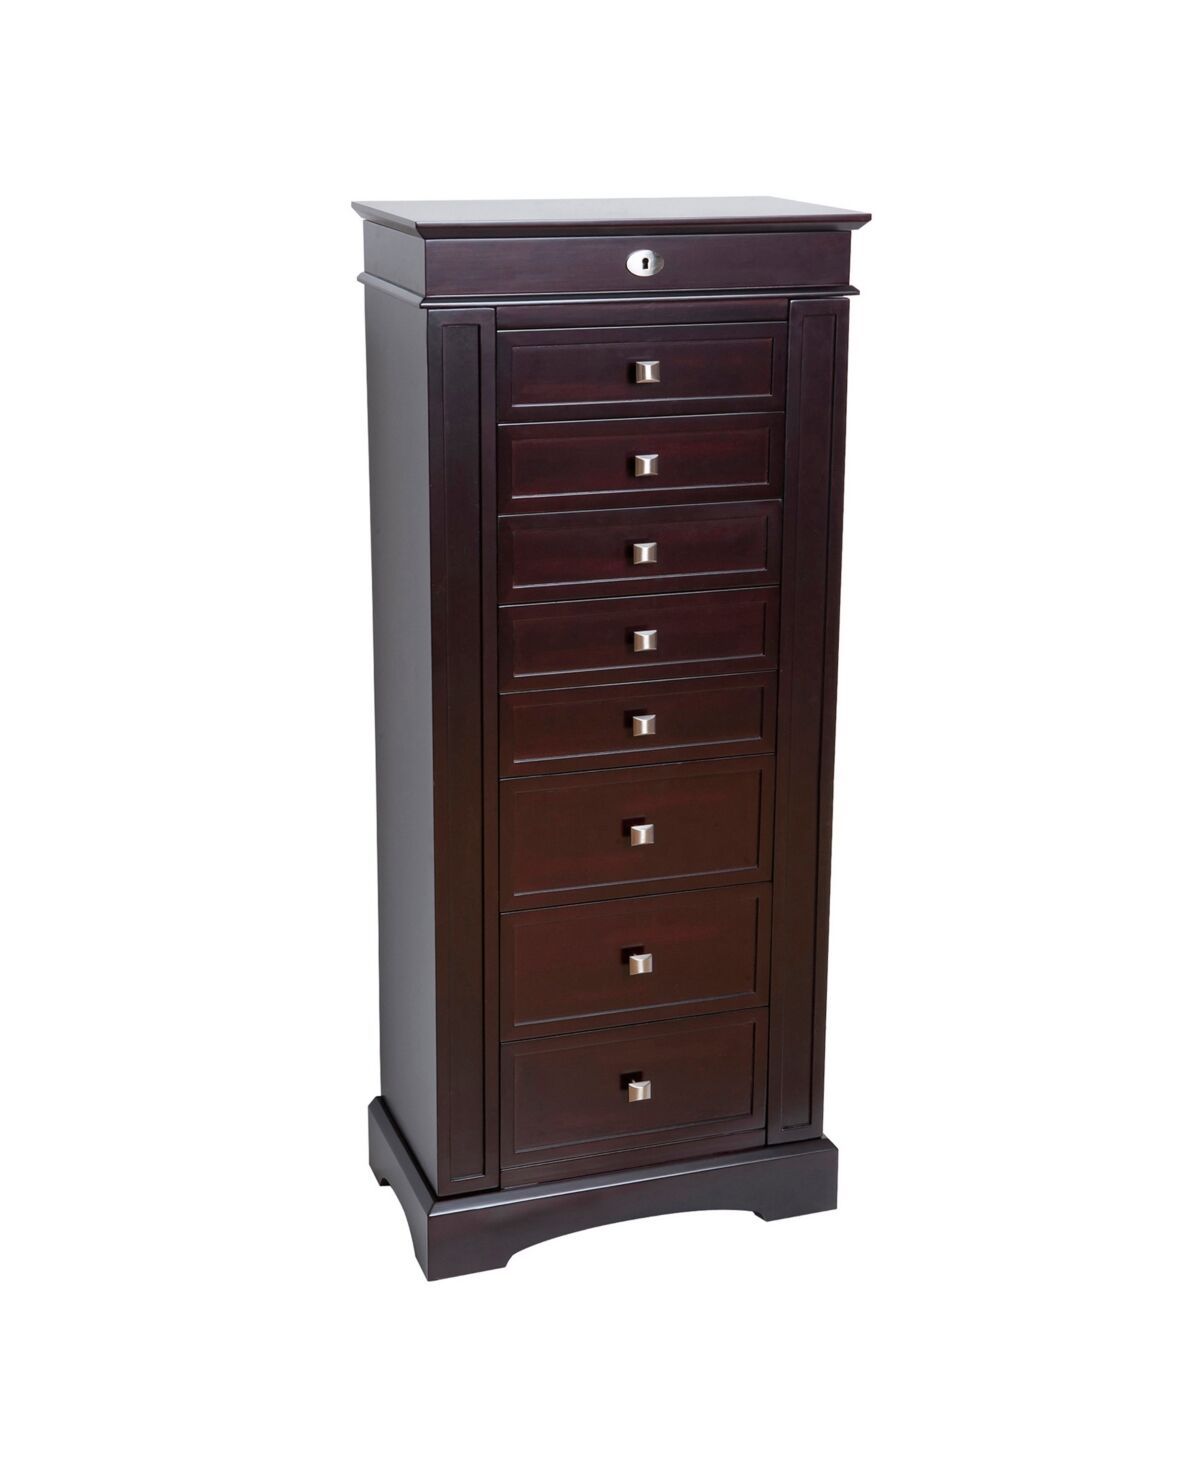 Mele & Co. Olympia Wooden Jewelry Armoire - Dark Brown